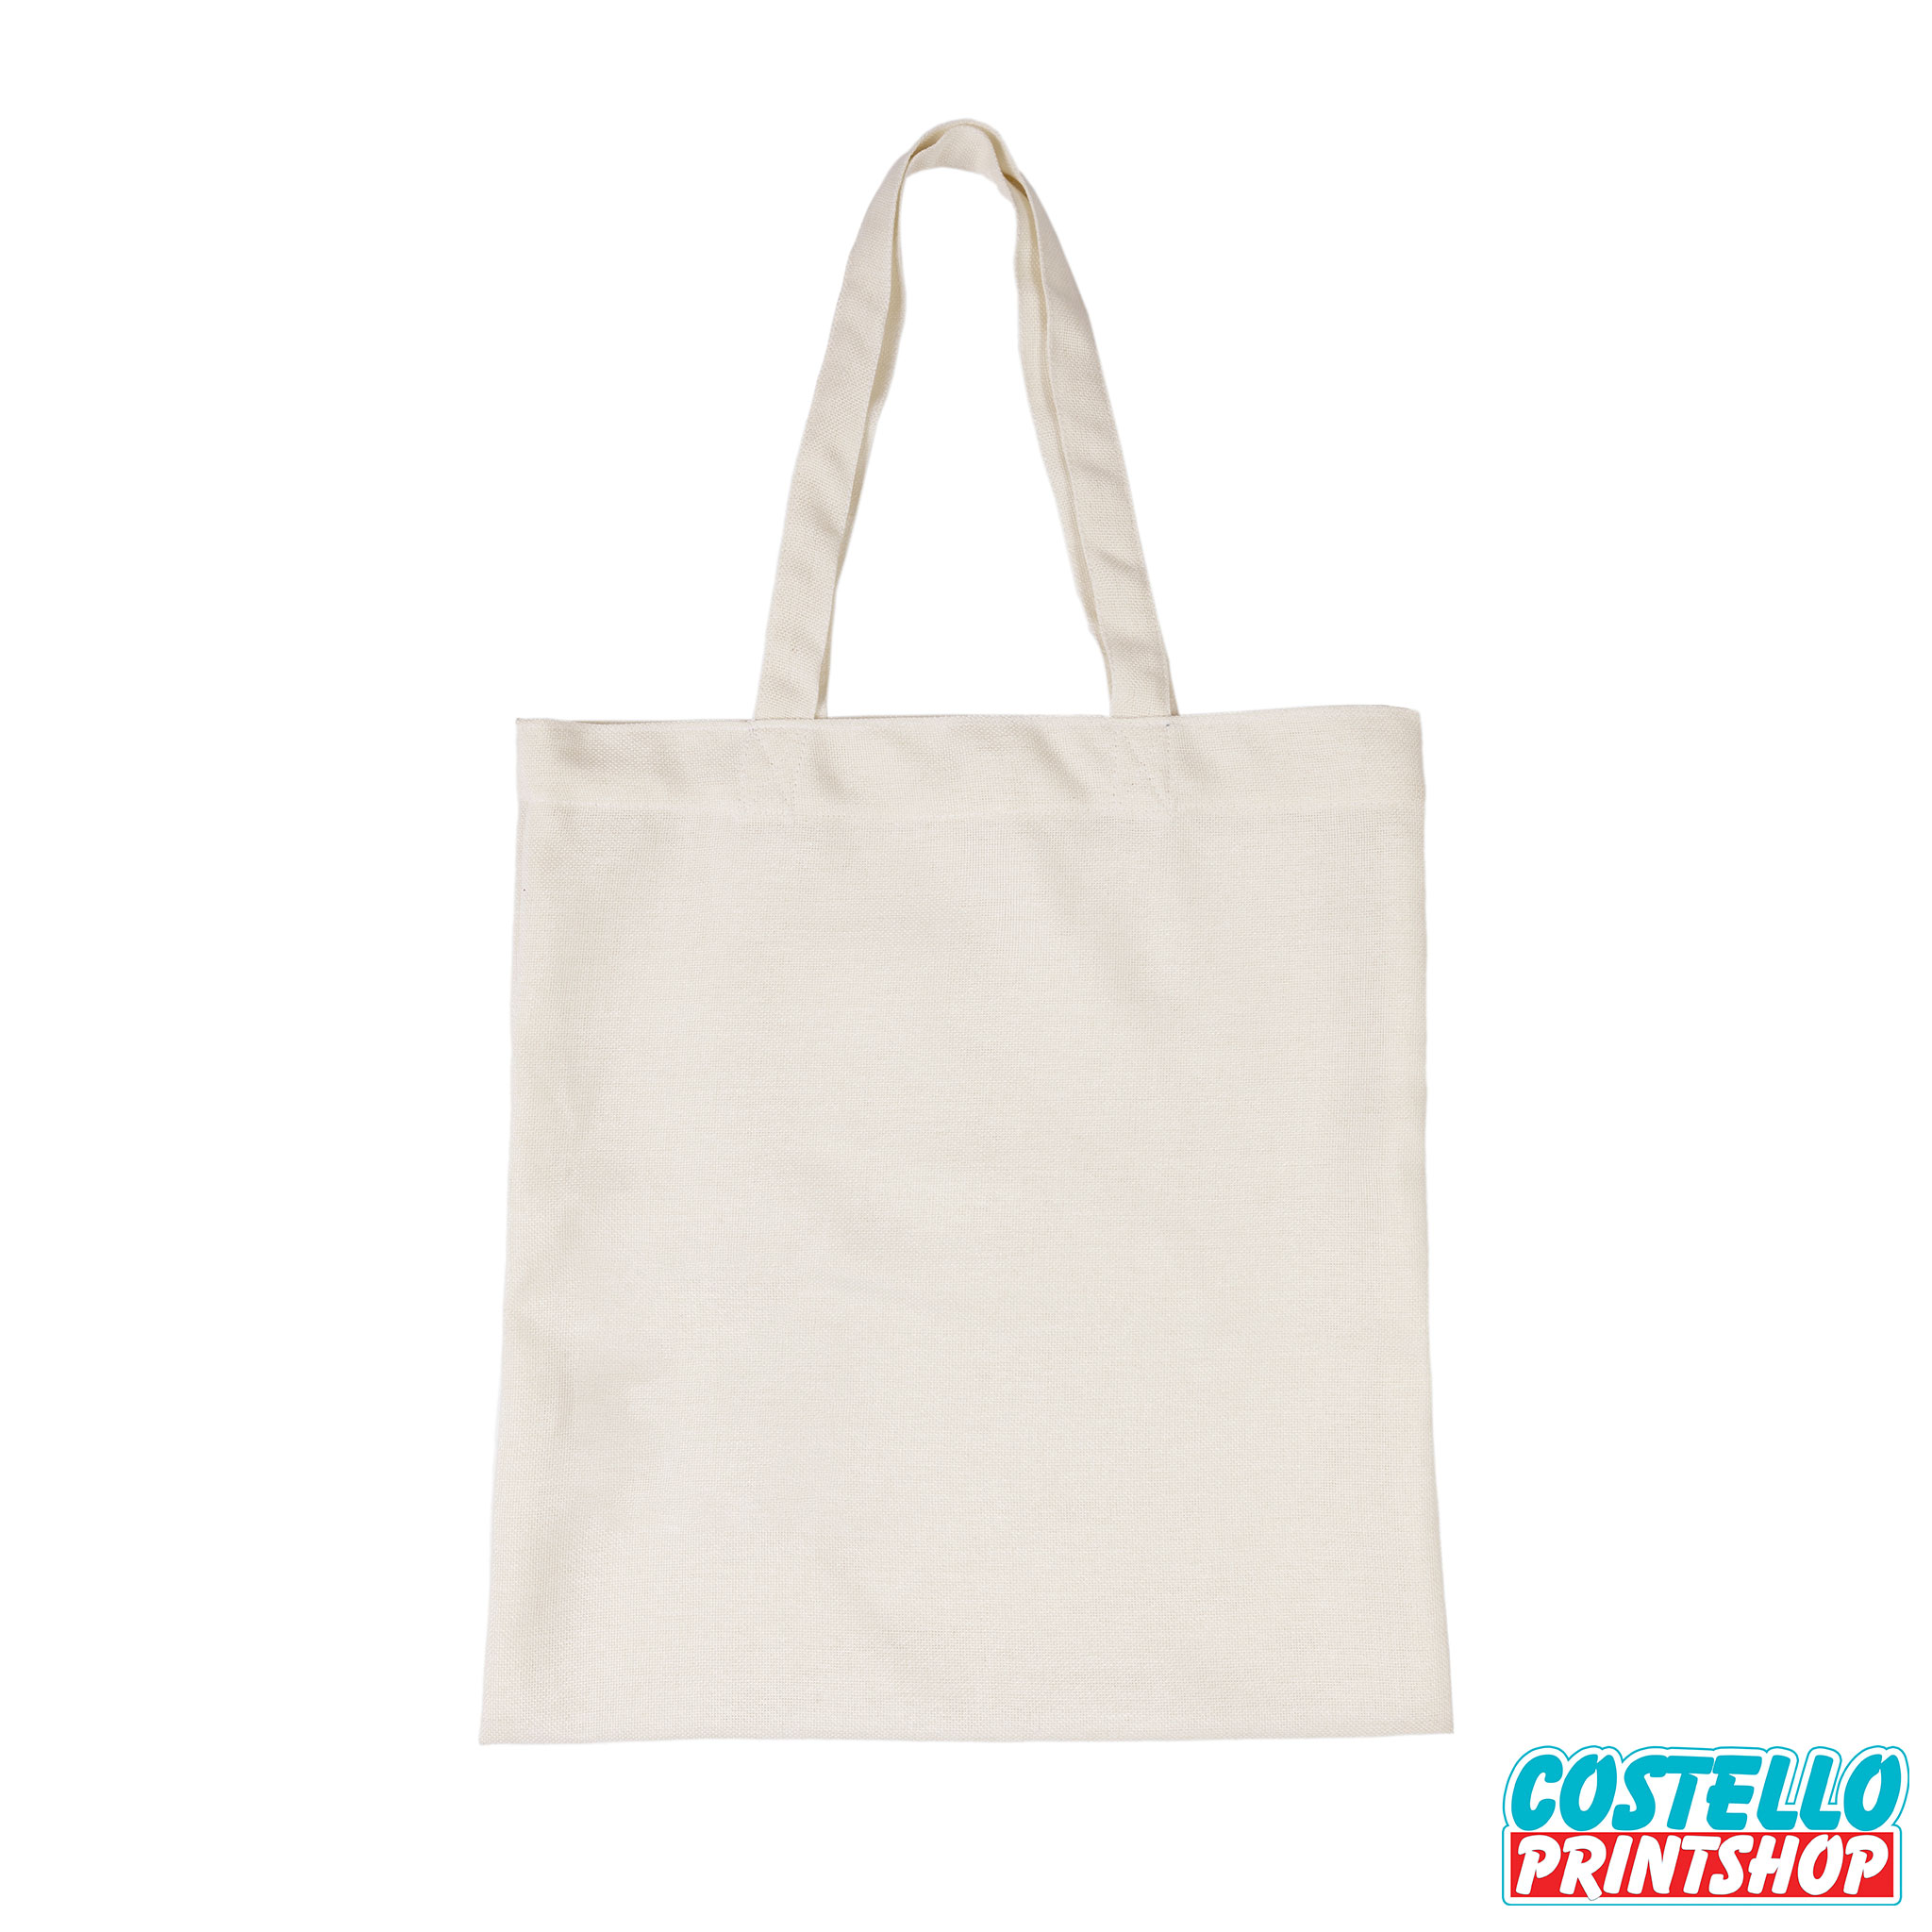 low-prices-on-custom-tote-bags